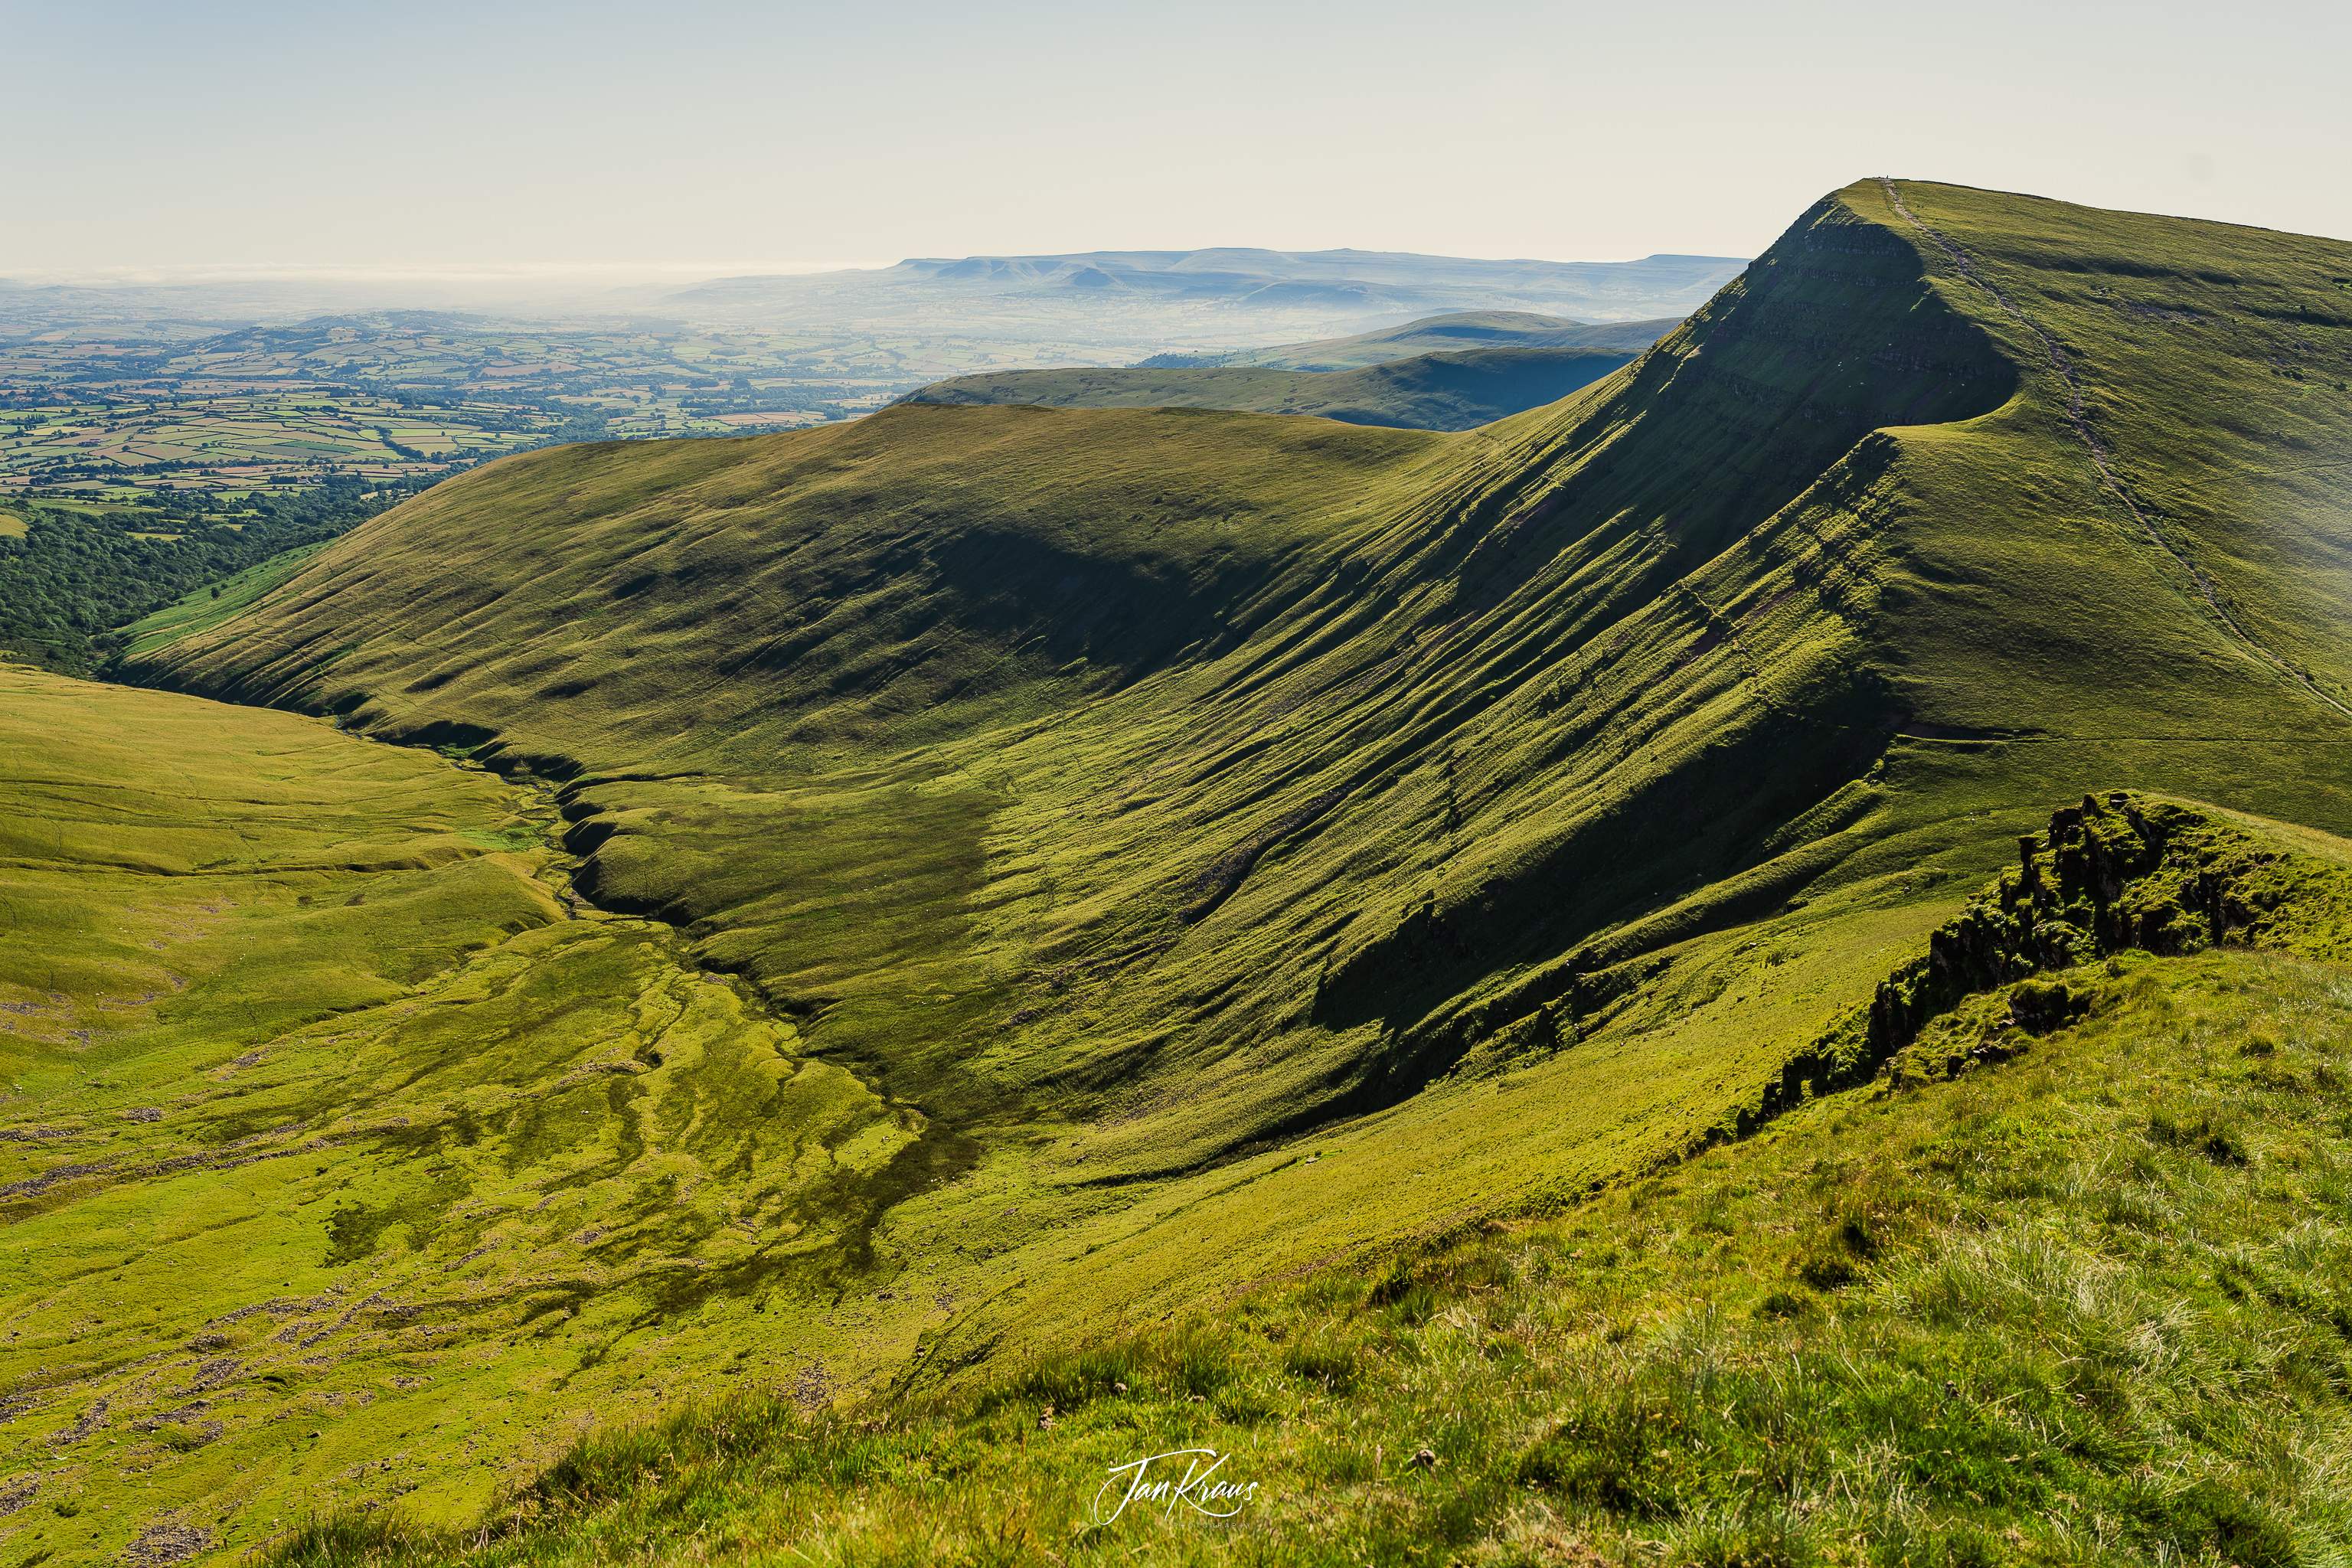 Views from hiking on the Beacons Horseshoe ridge, Brecon Beacons Mountains, Wales, UK